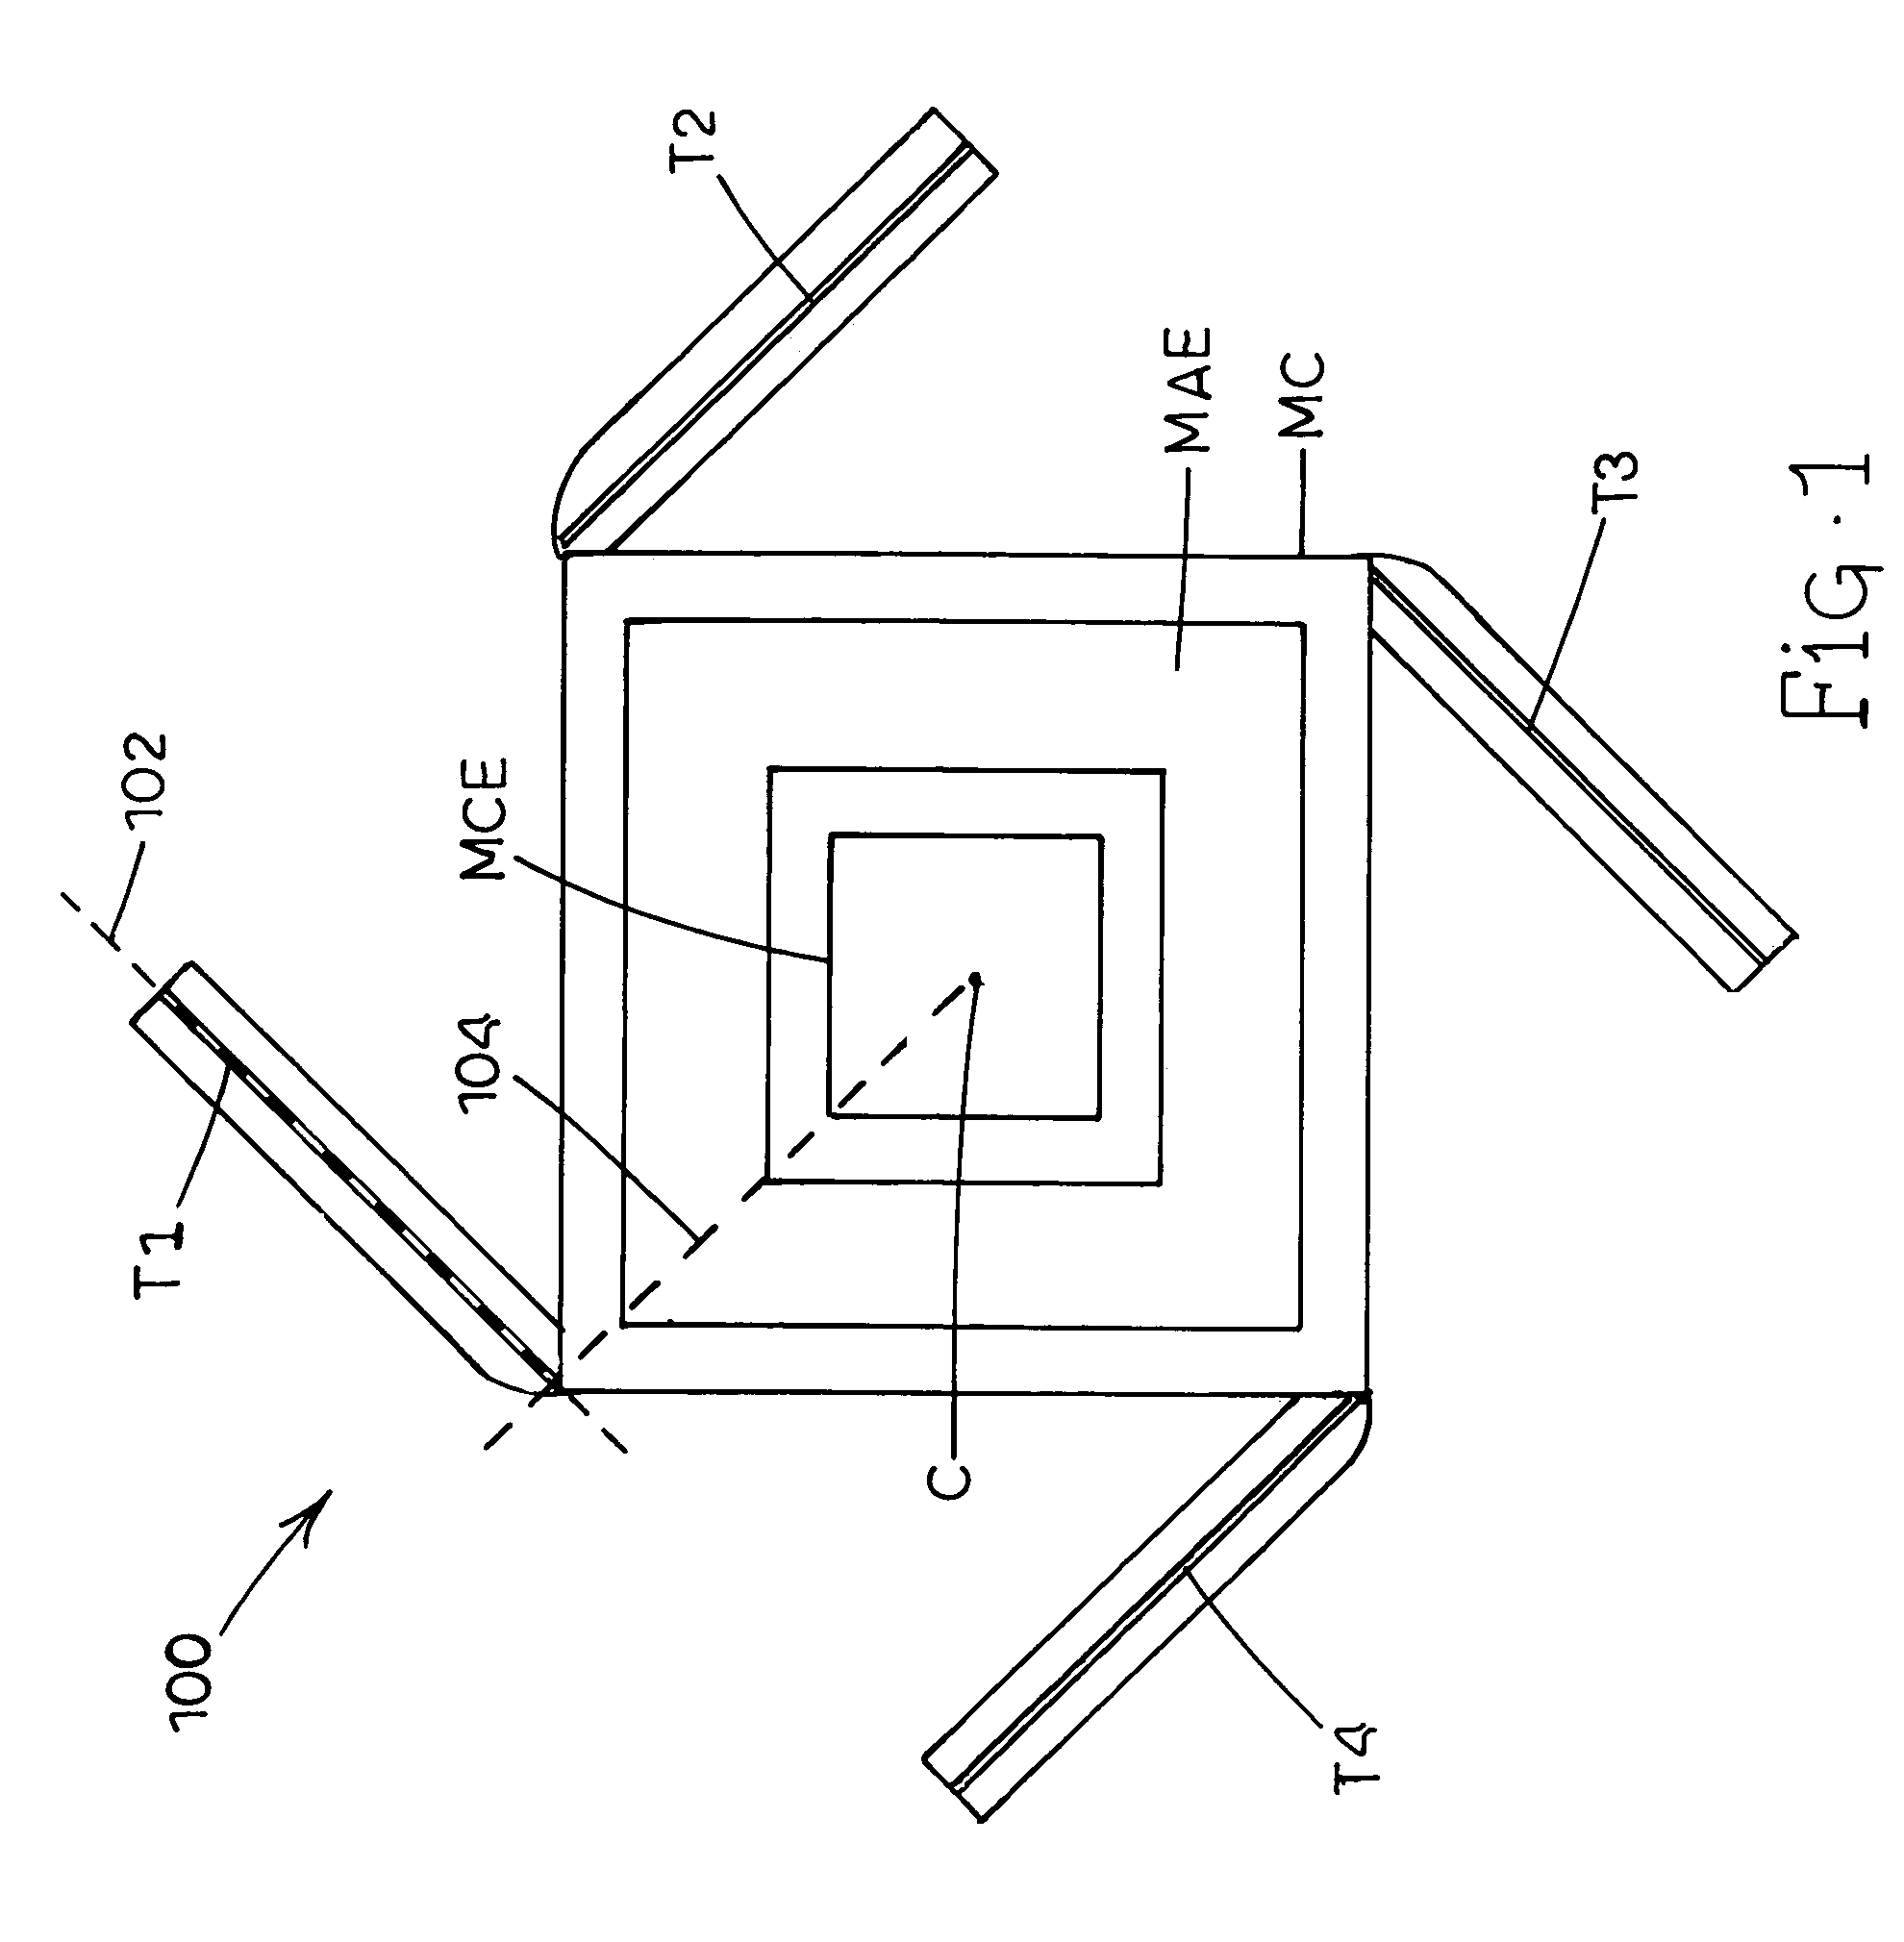 Micro-electro-mechanical system (MEMS) variable capacitor apparatuses, systems and related methods